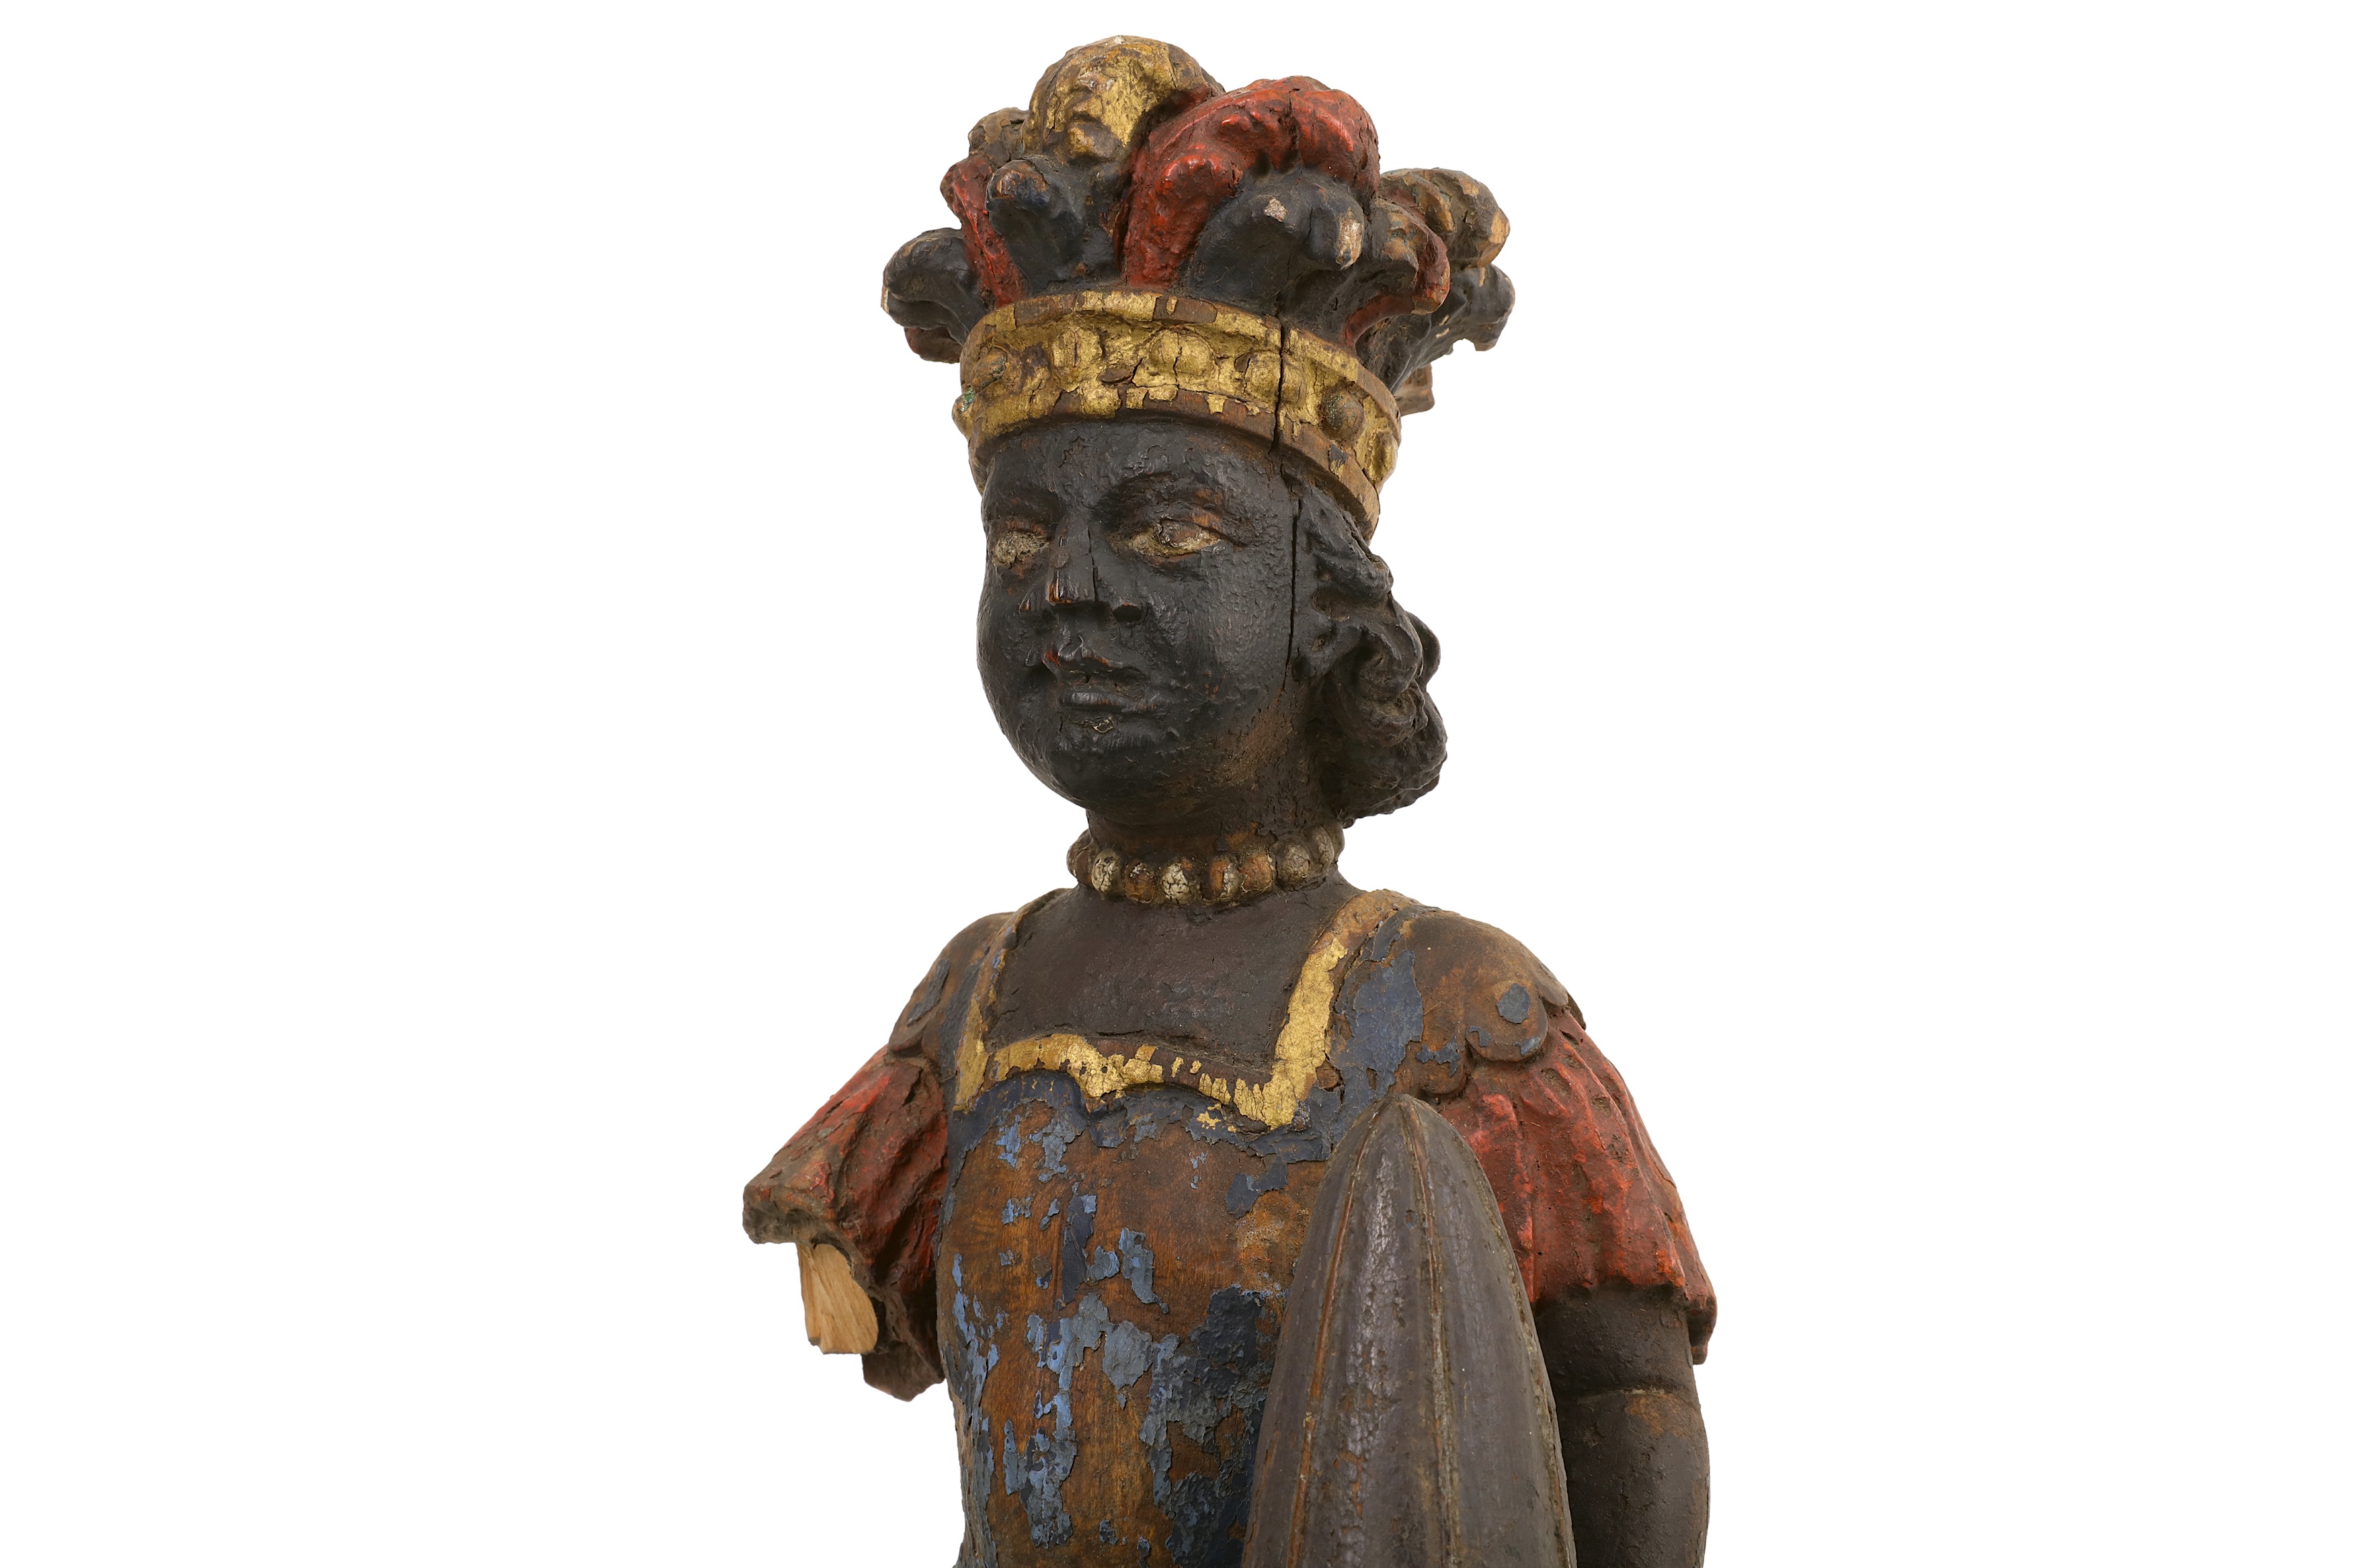 A RARE 18TH CENTURY CARVED AND POLYCHROME DECORATED TOBACCO SHOP SIGN MODELLED AS A NATIVE - Image 5 of 7